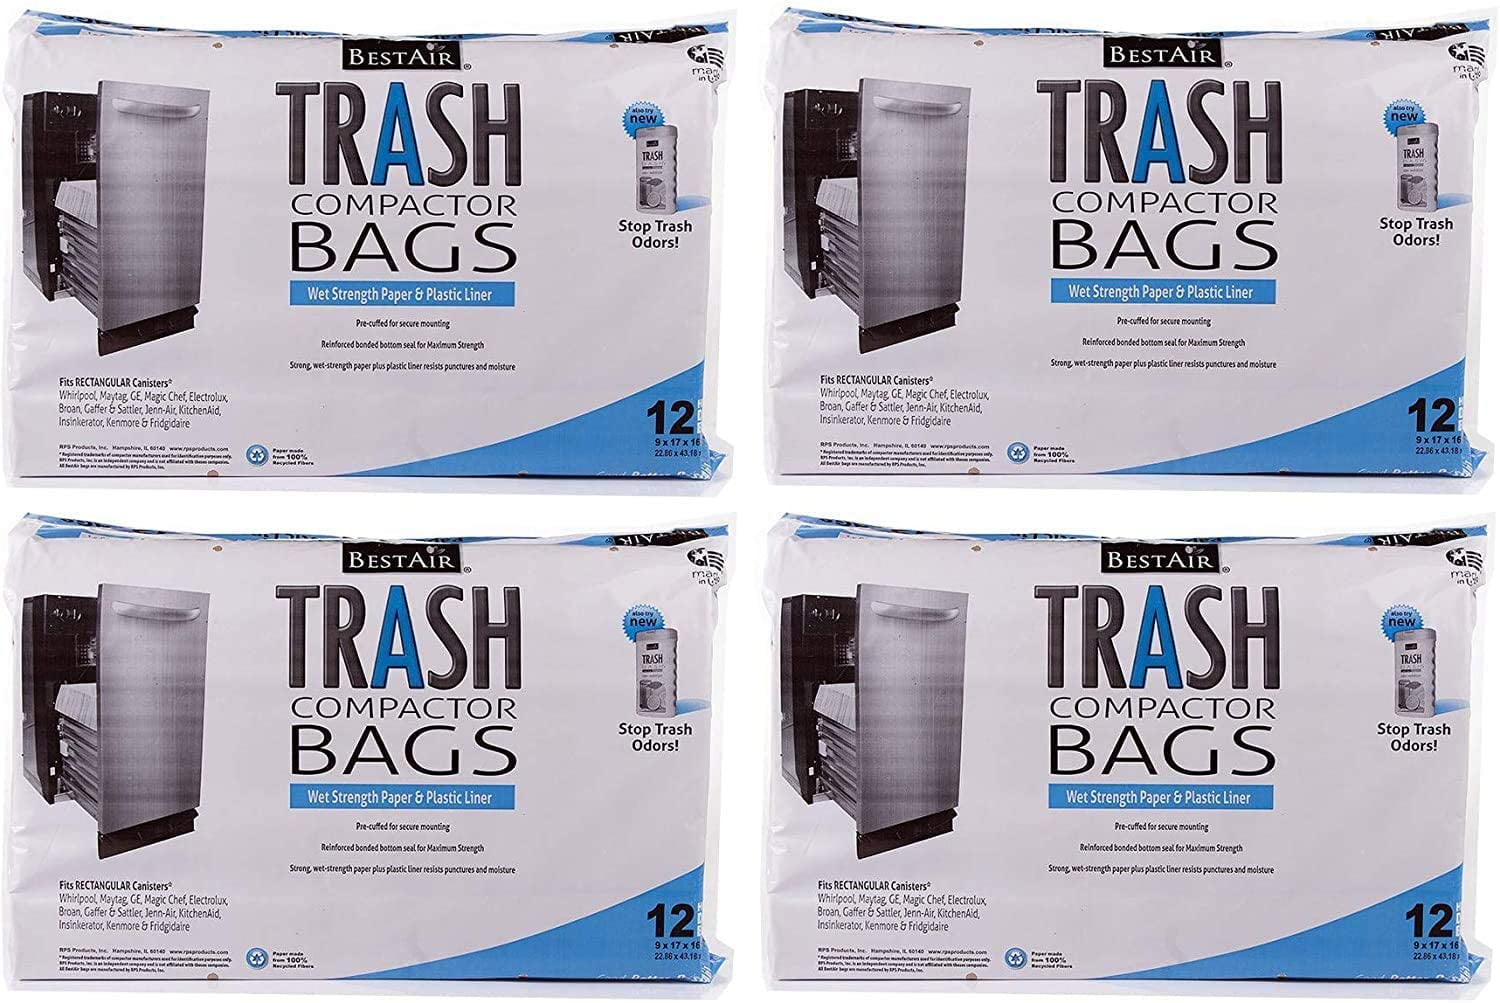 Best Air Trash Compactor Bags WMCK1335012 2-Ply 24 Bags 